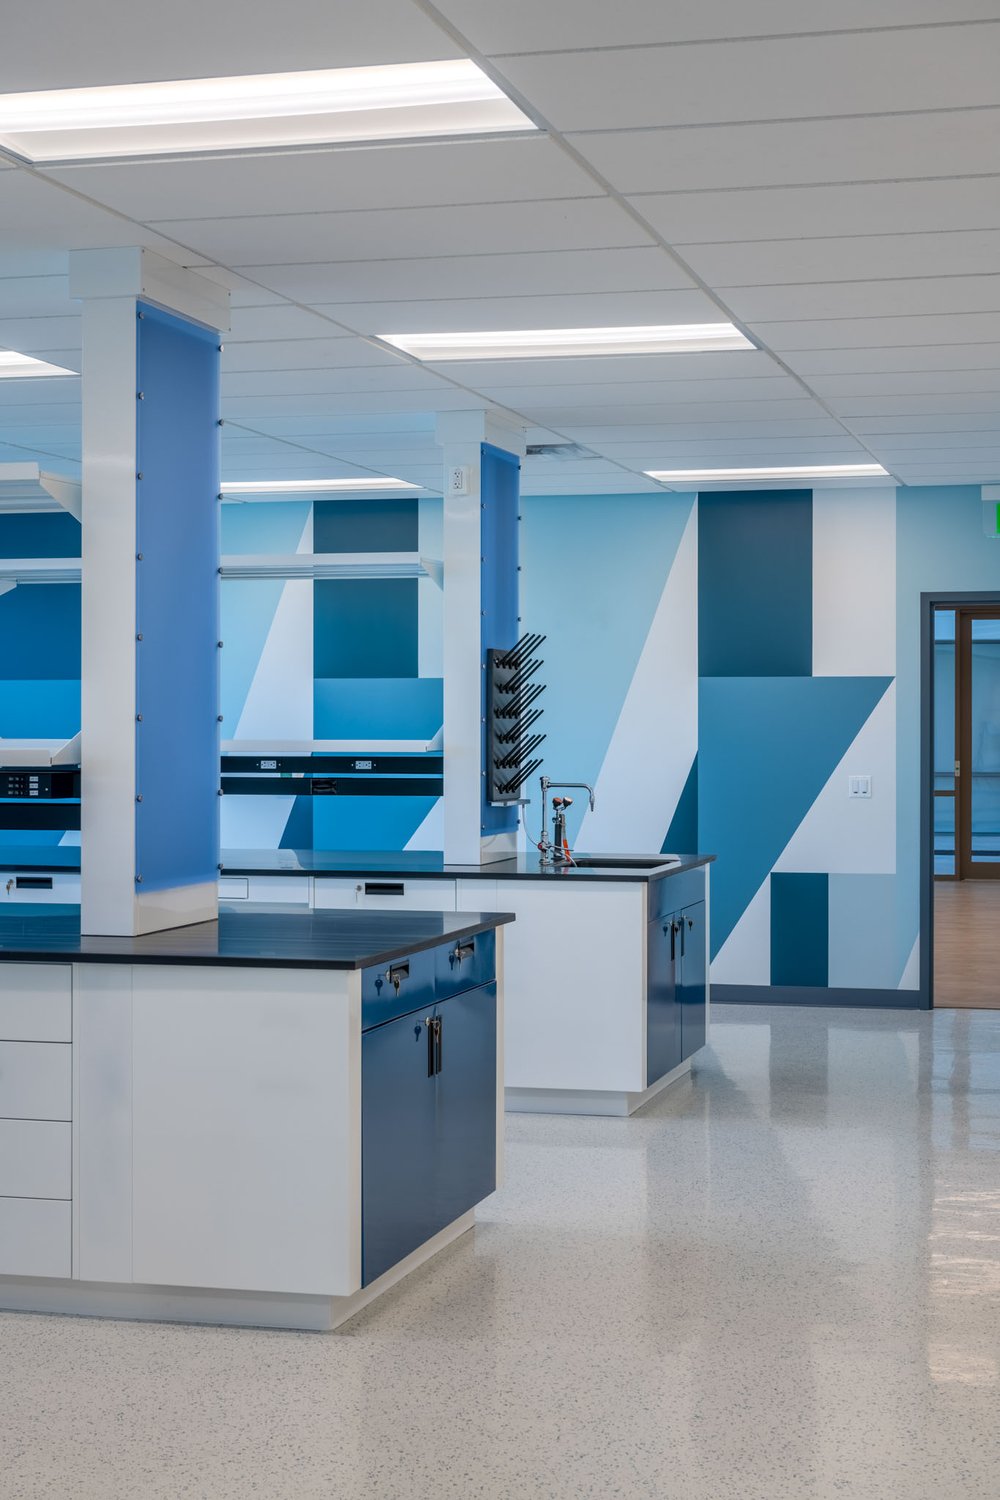 NAIOP DC|MD Awards Precision Labs as Best Life Science Facility | Germantown, MD